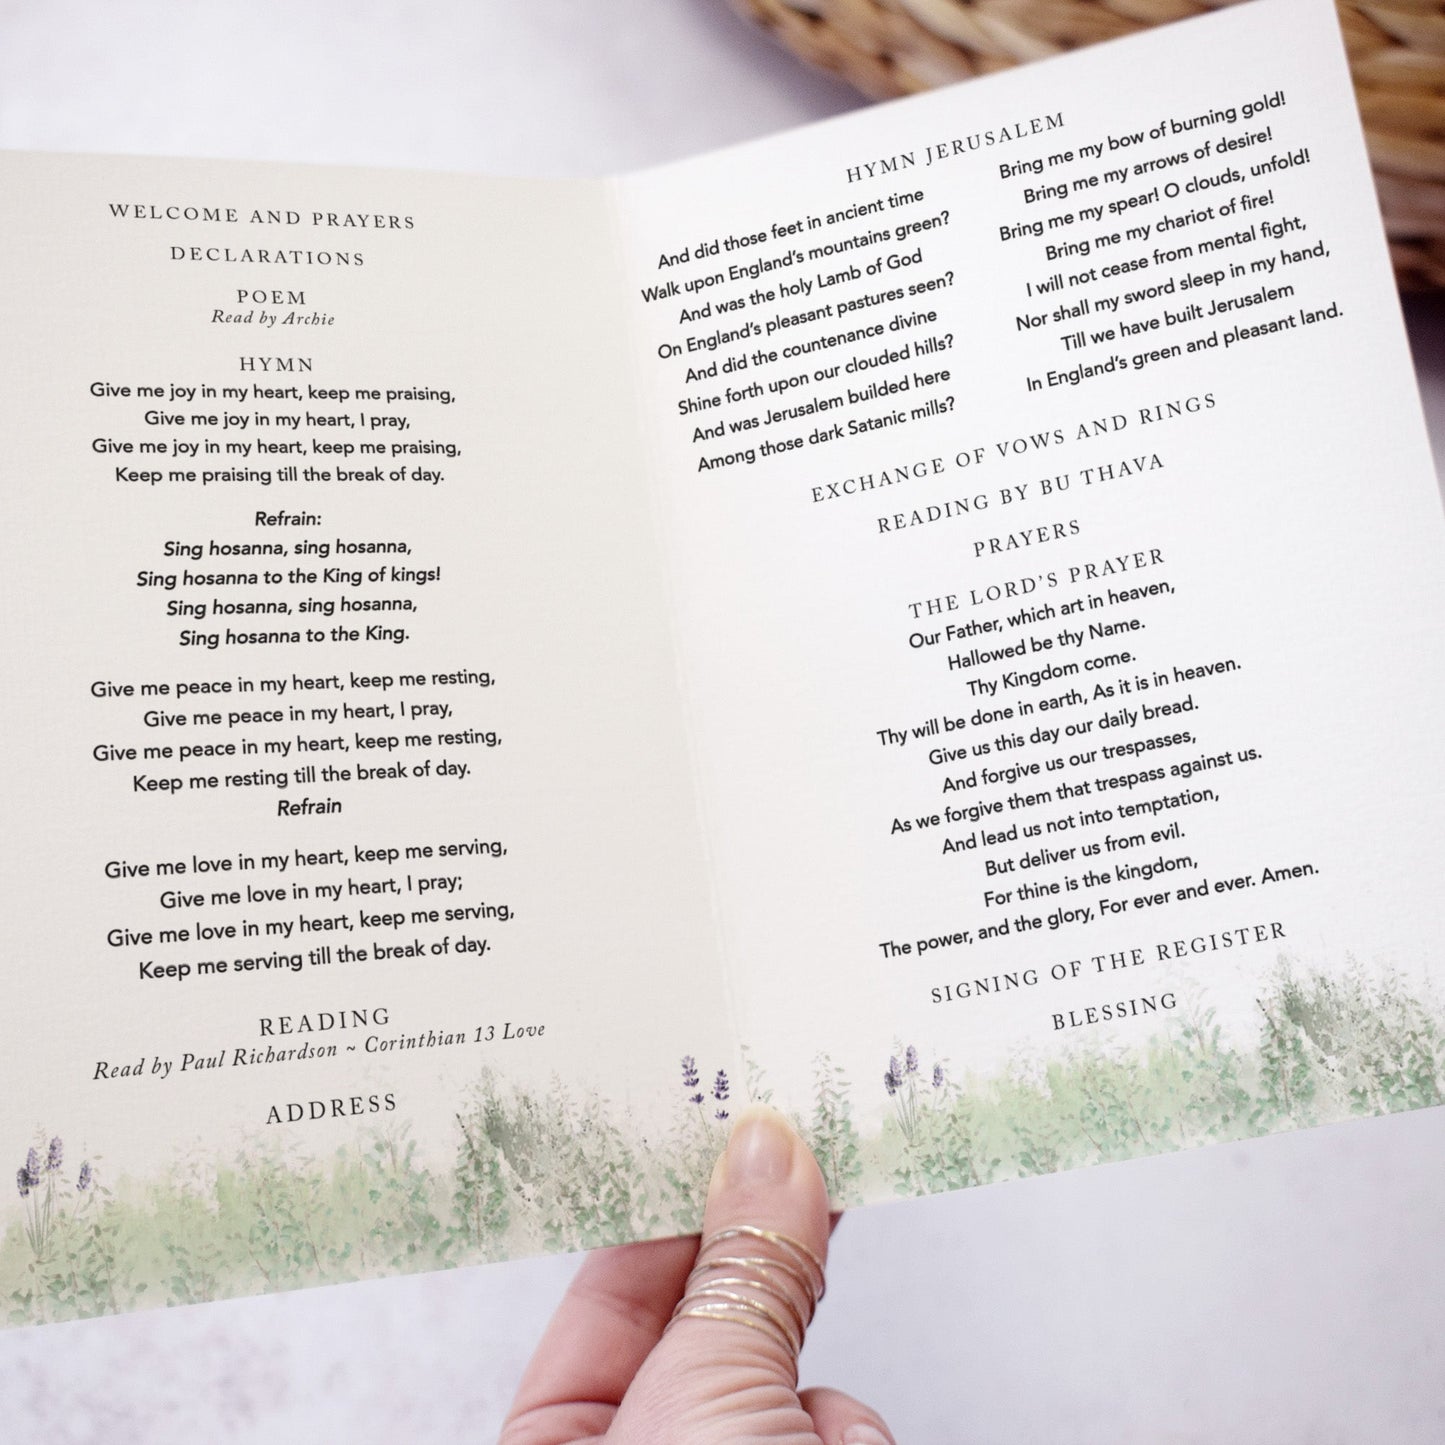 4 PAGE 'Whimsical Wreath' Wedding Order of Service Booklet